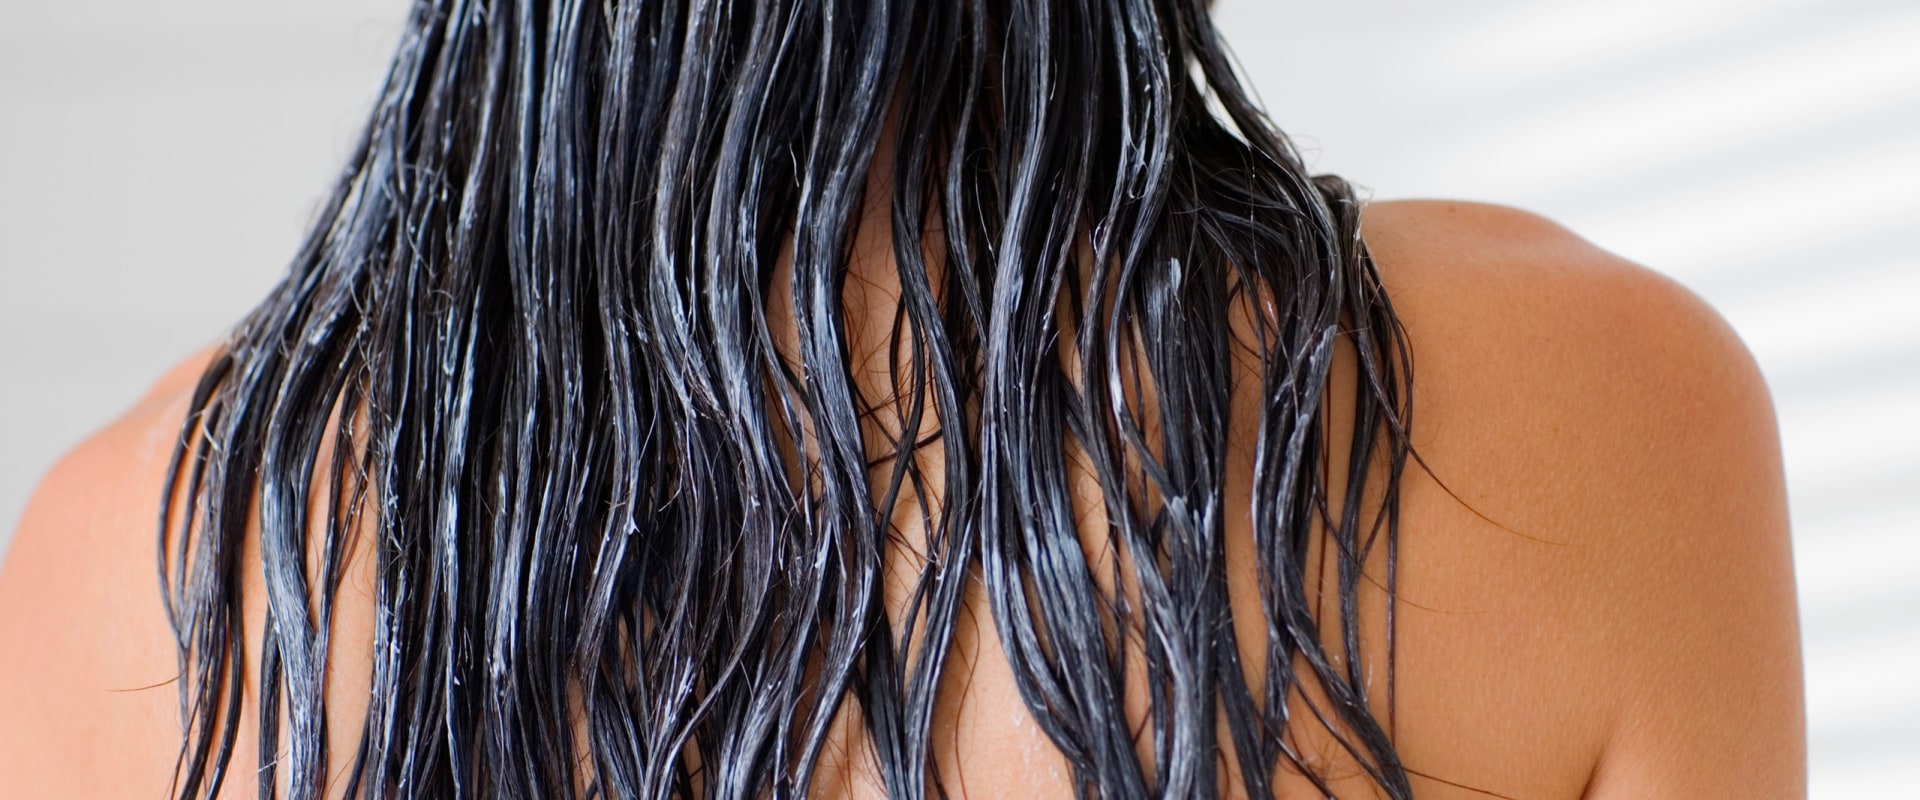 Shampoos and Conditioners for Women's Hair: A Comprehensive Overview